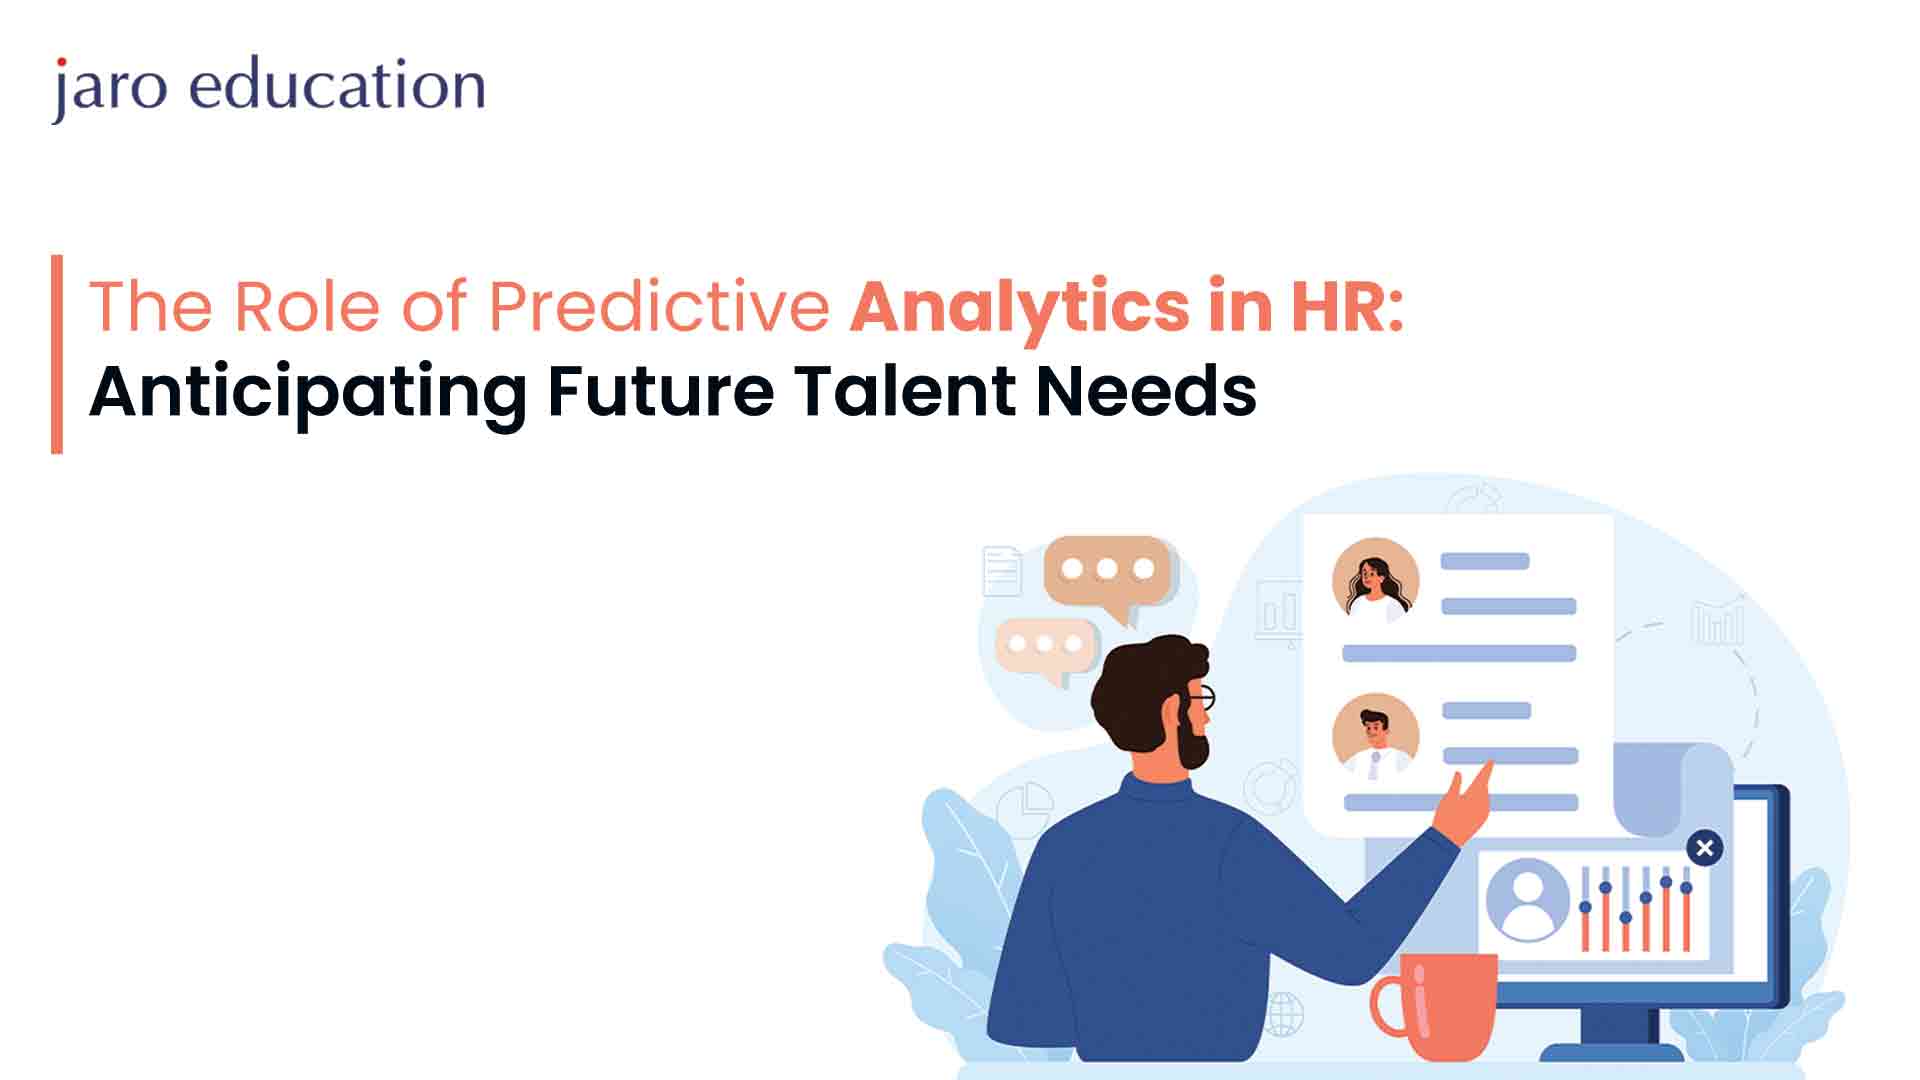 The Role of Predictive Analytics in HR Anticipating Future Talent Needs